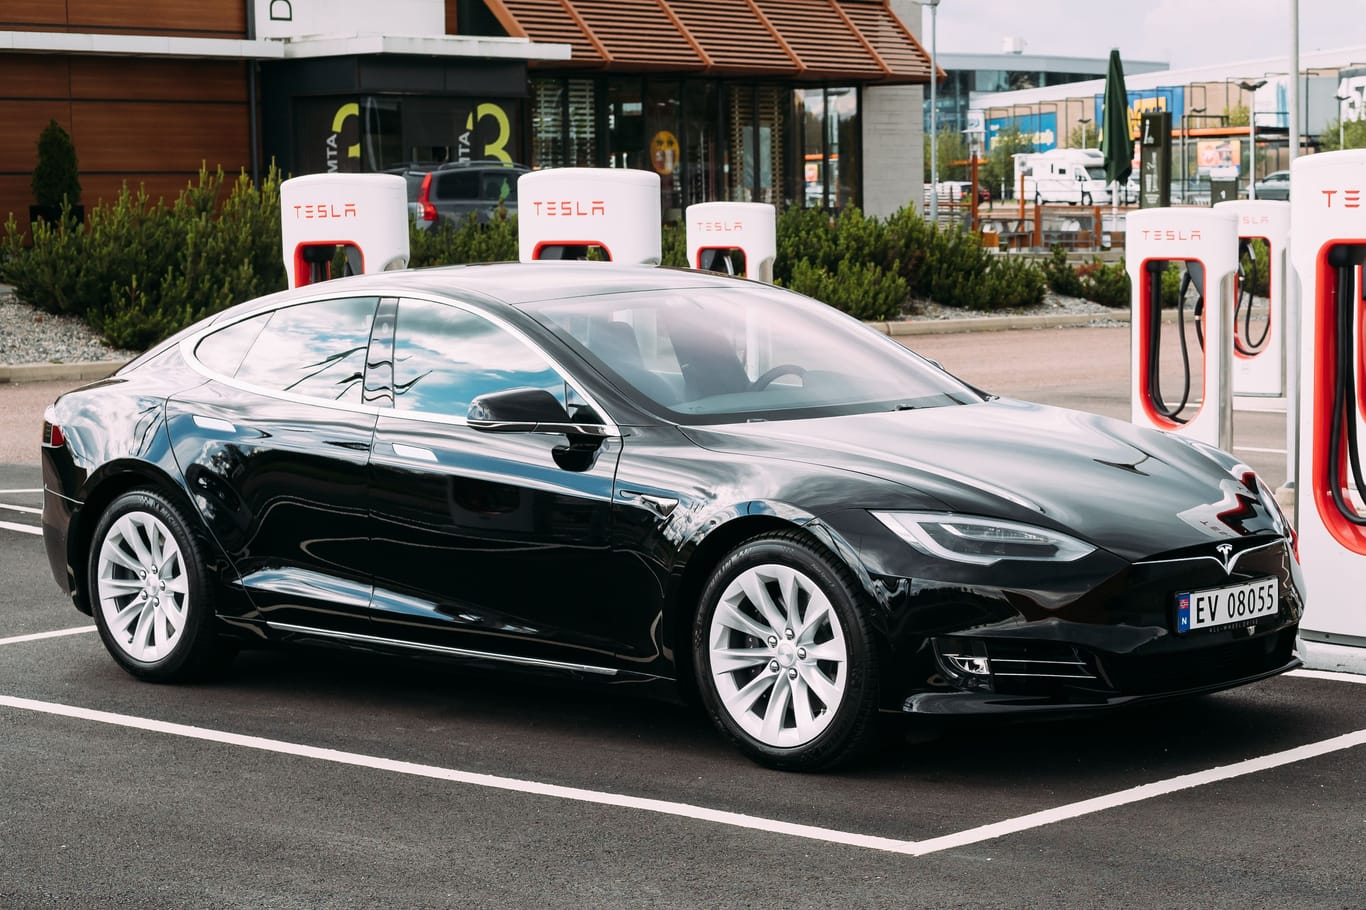 Black Color Tesla Model S 100d Car Parked At Charging Station. The Tesla Model S Is A Full-sized All-electric Five-door, Luxury Liftback, Produced By Tesla Inc.